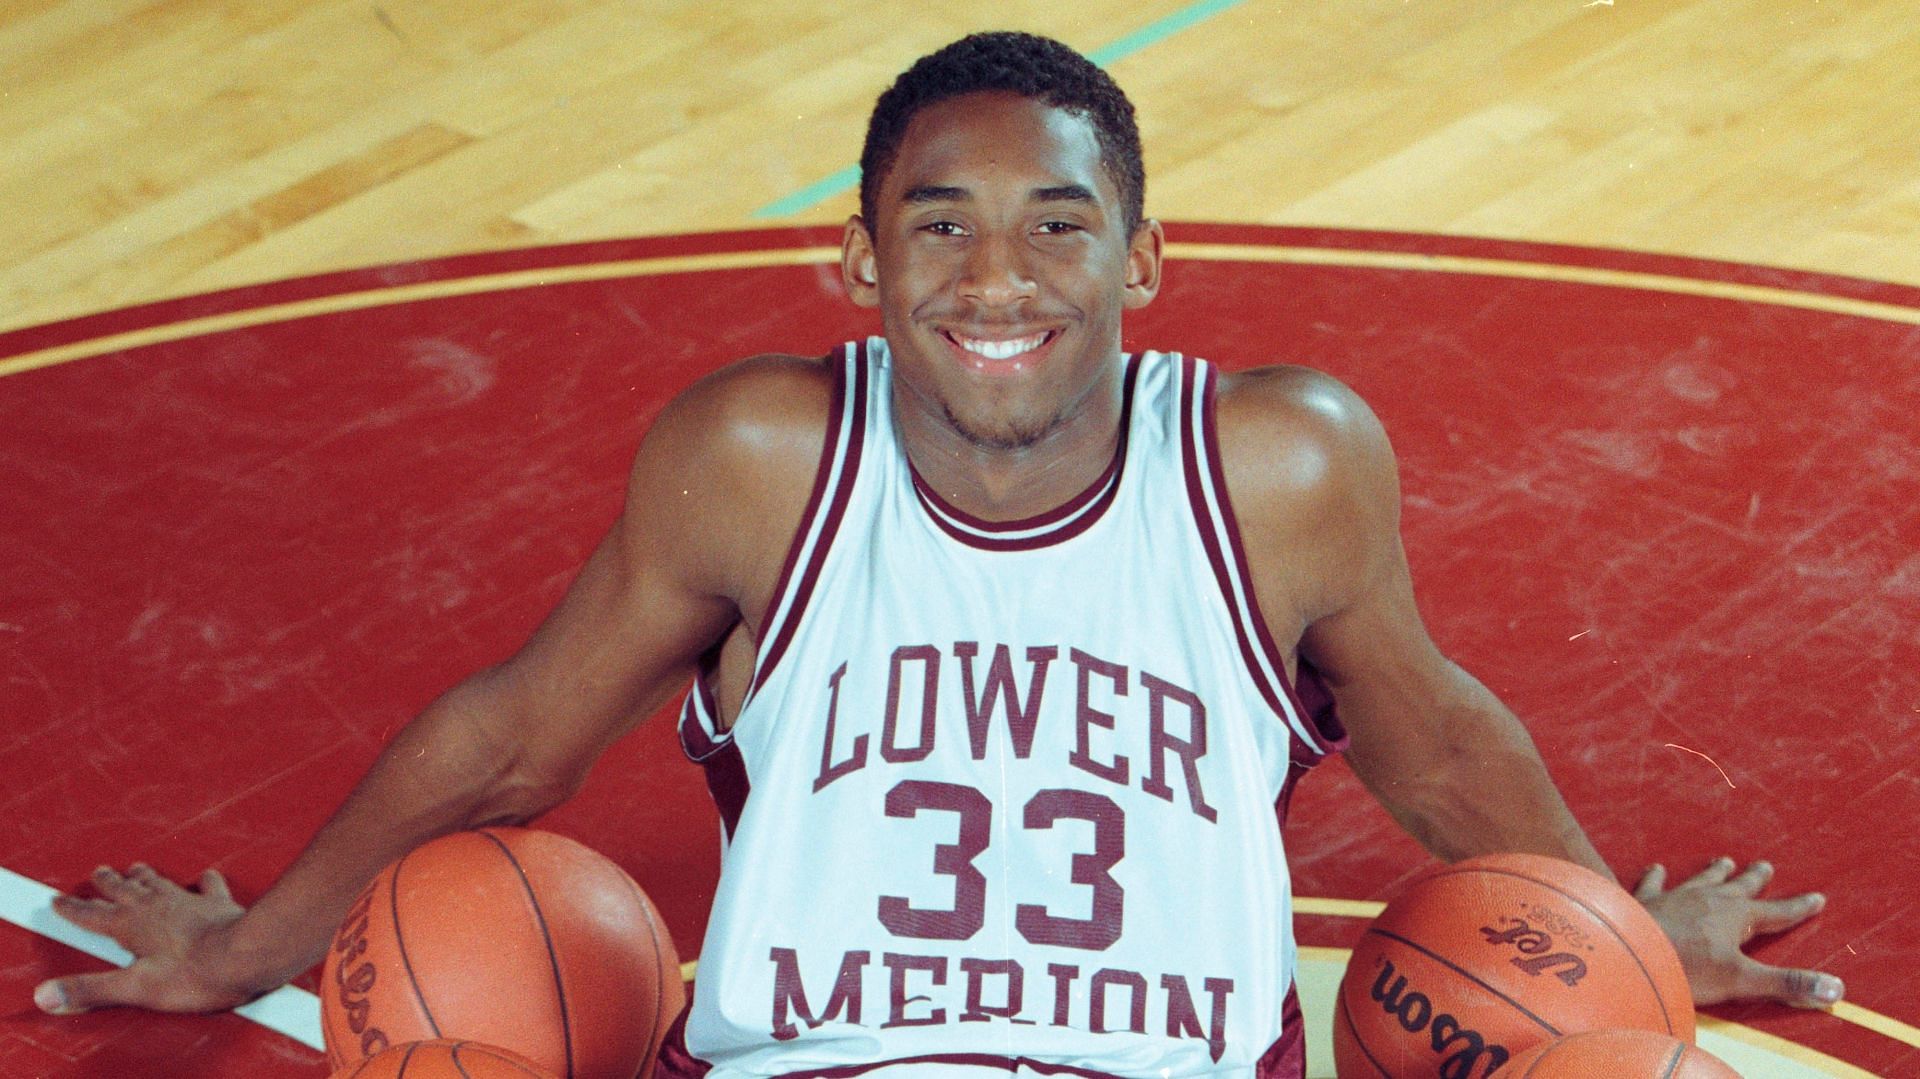 Kobe Bryant as a teenager in Lower Merion High School [Source: USA Today]